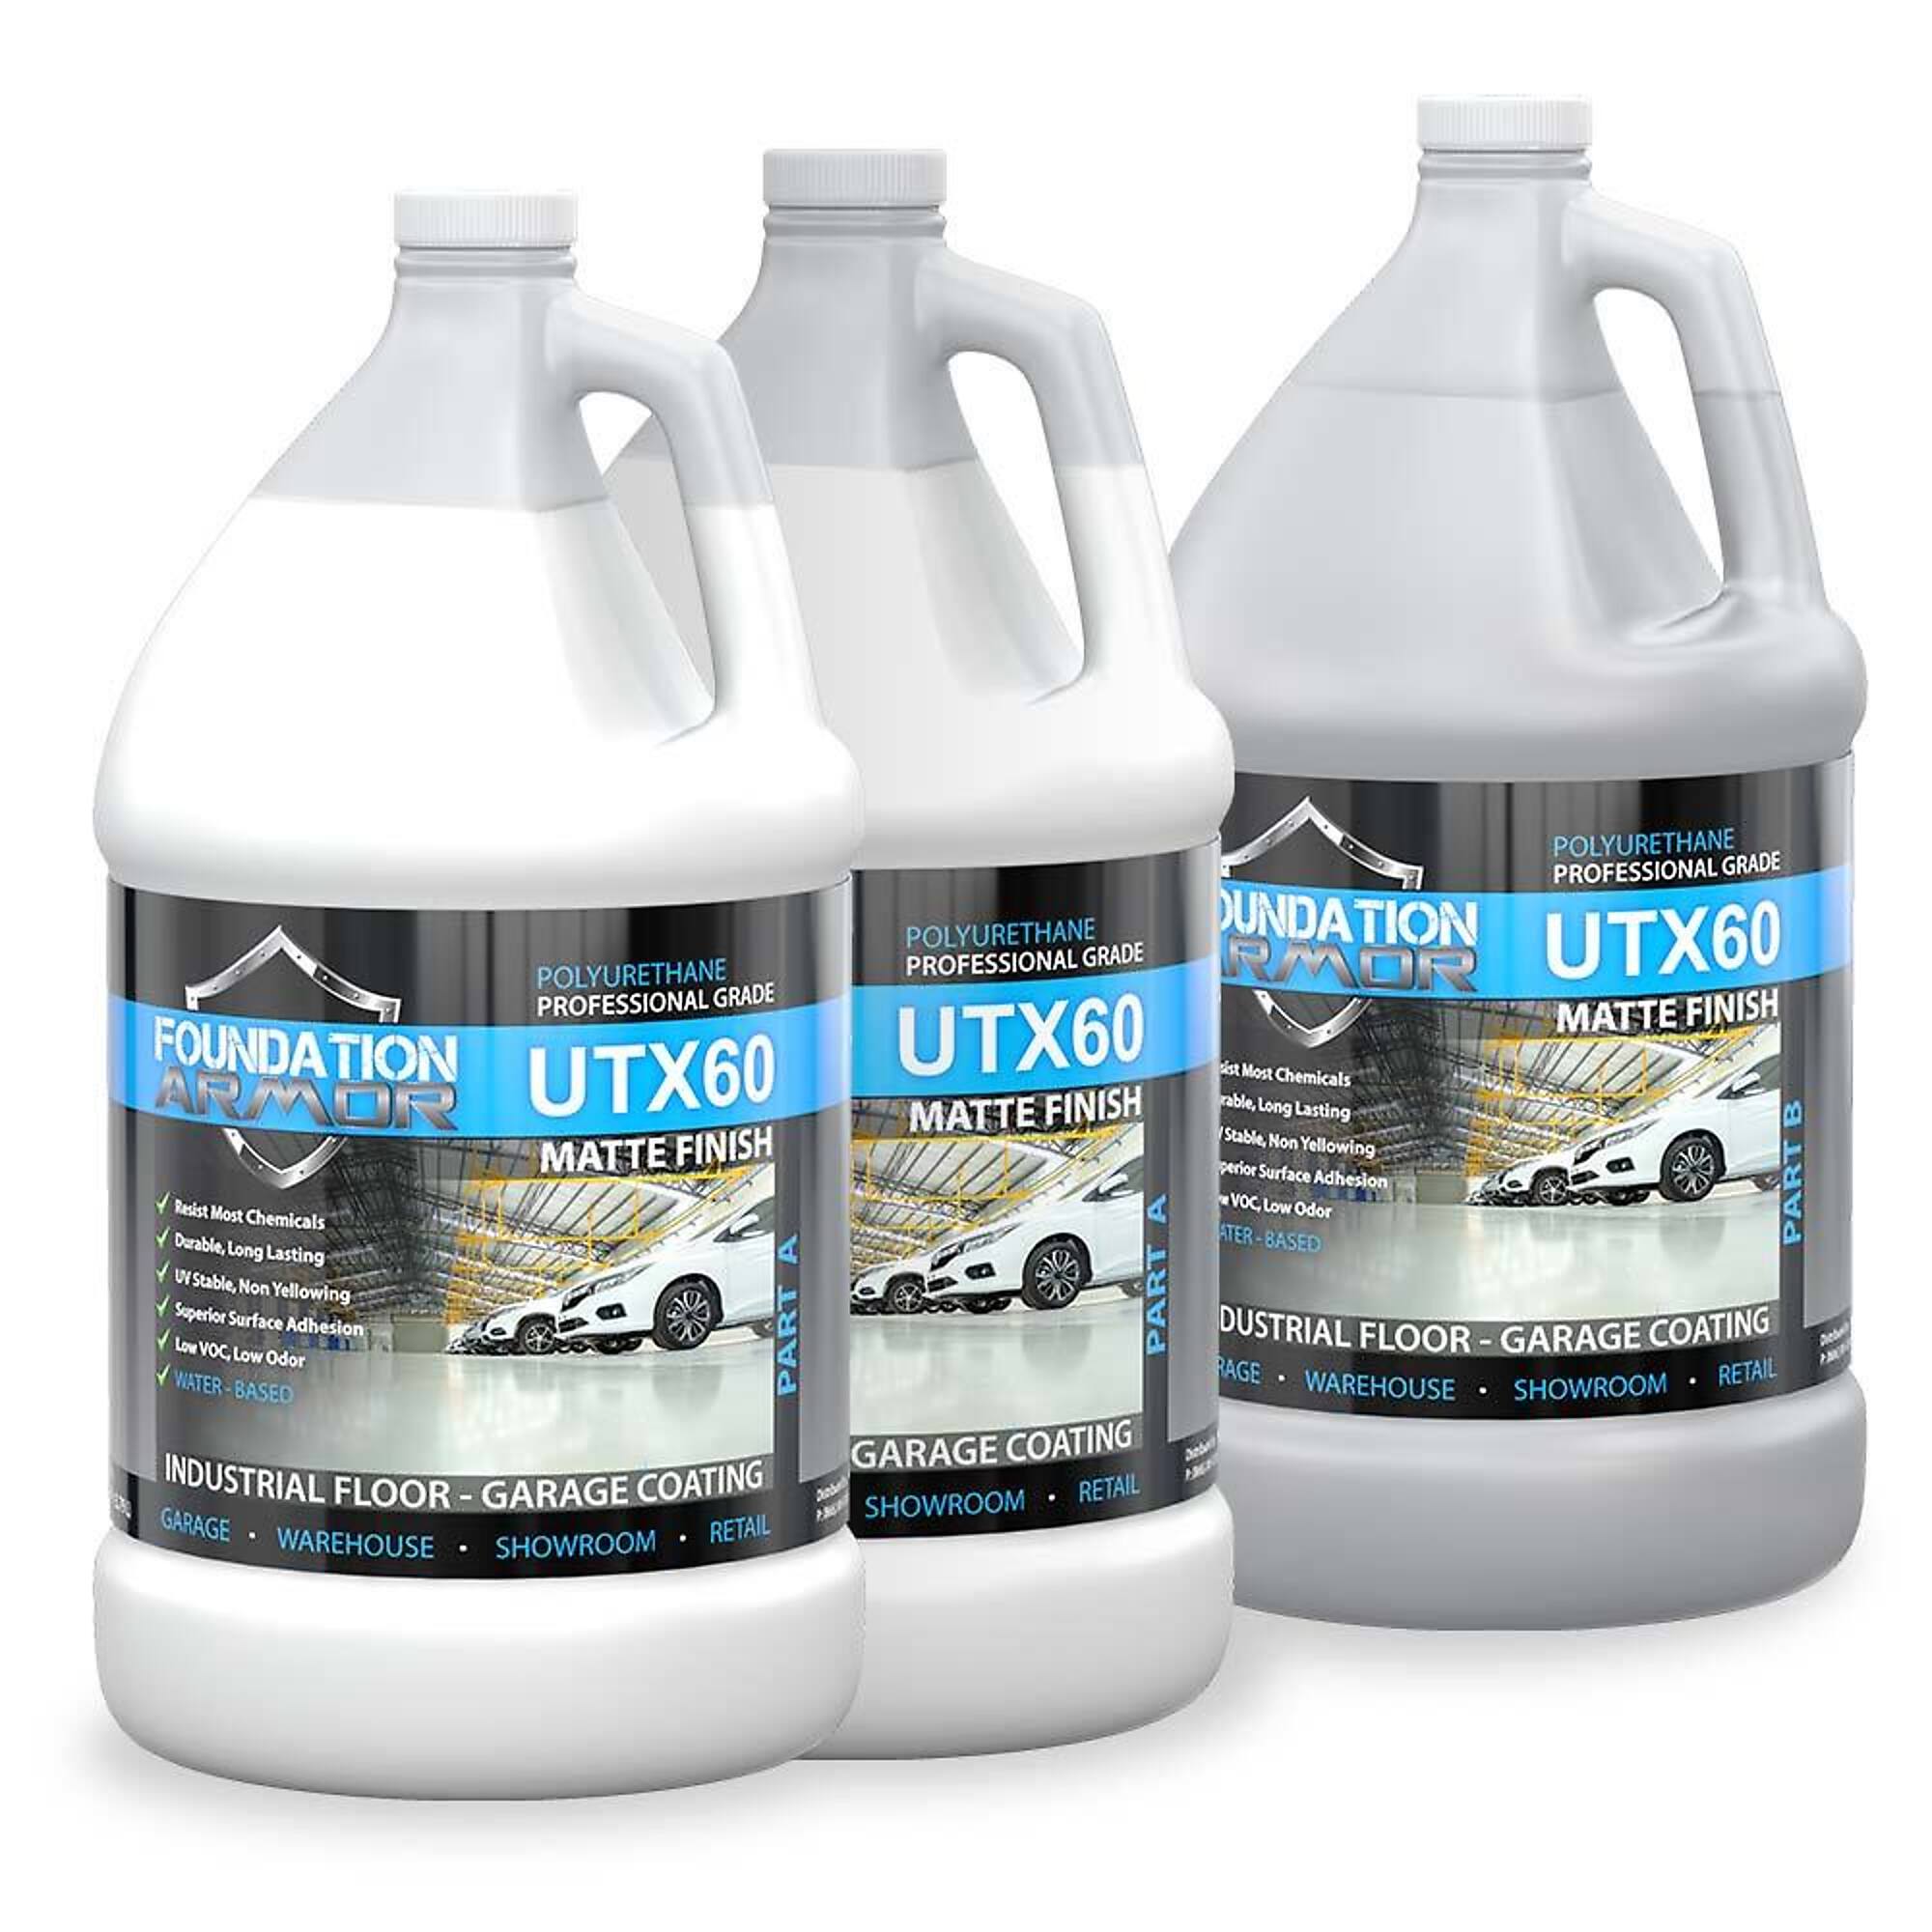 Foundation Armor, Matte Chemical Resistant Urethane Floor Coating, Container Size 3 Gallon, Color Clear, Application Method Roller, Model UTX60MATTE